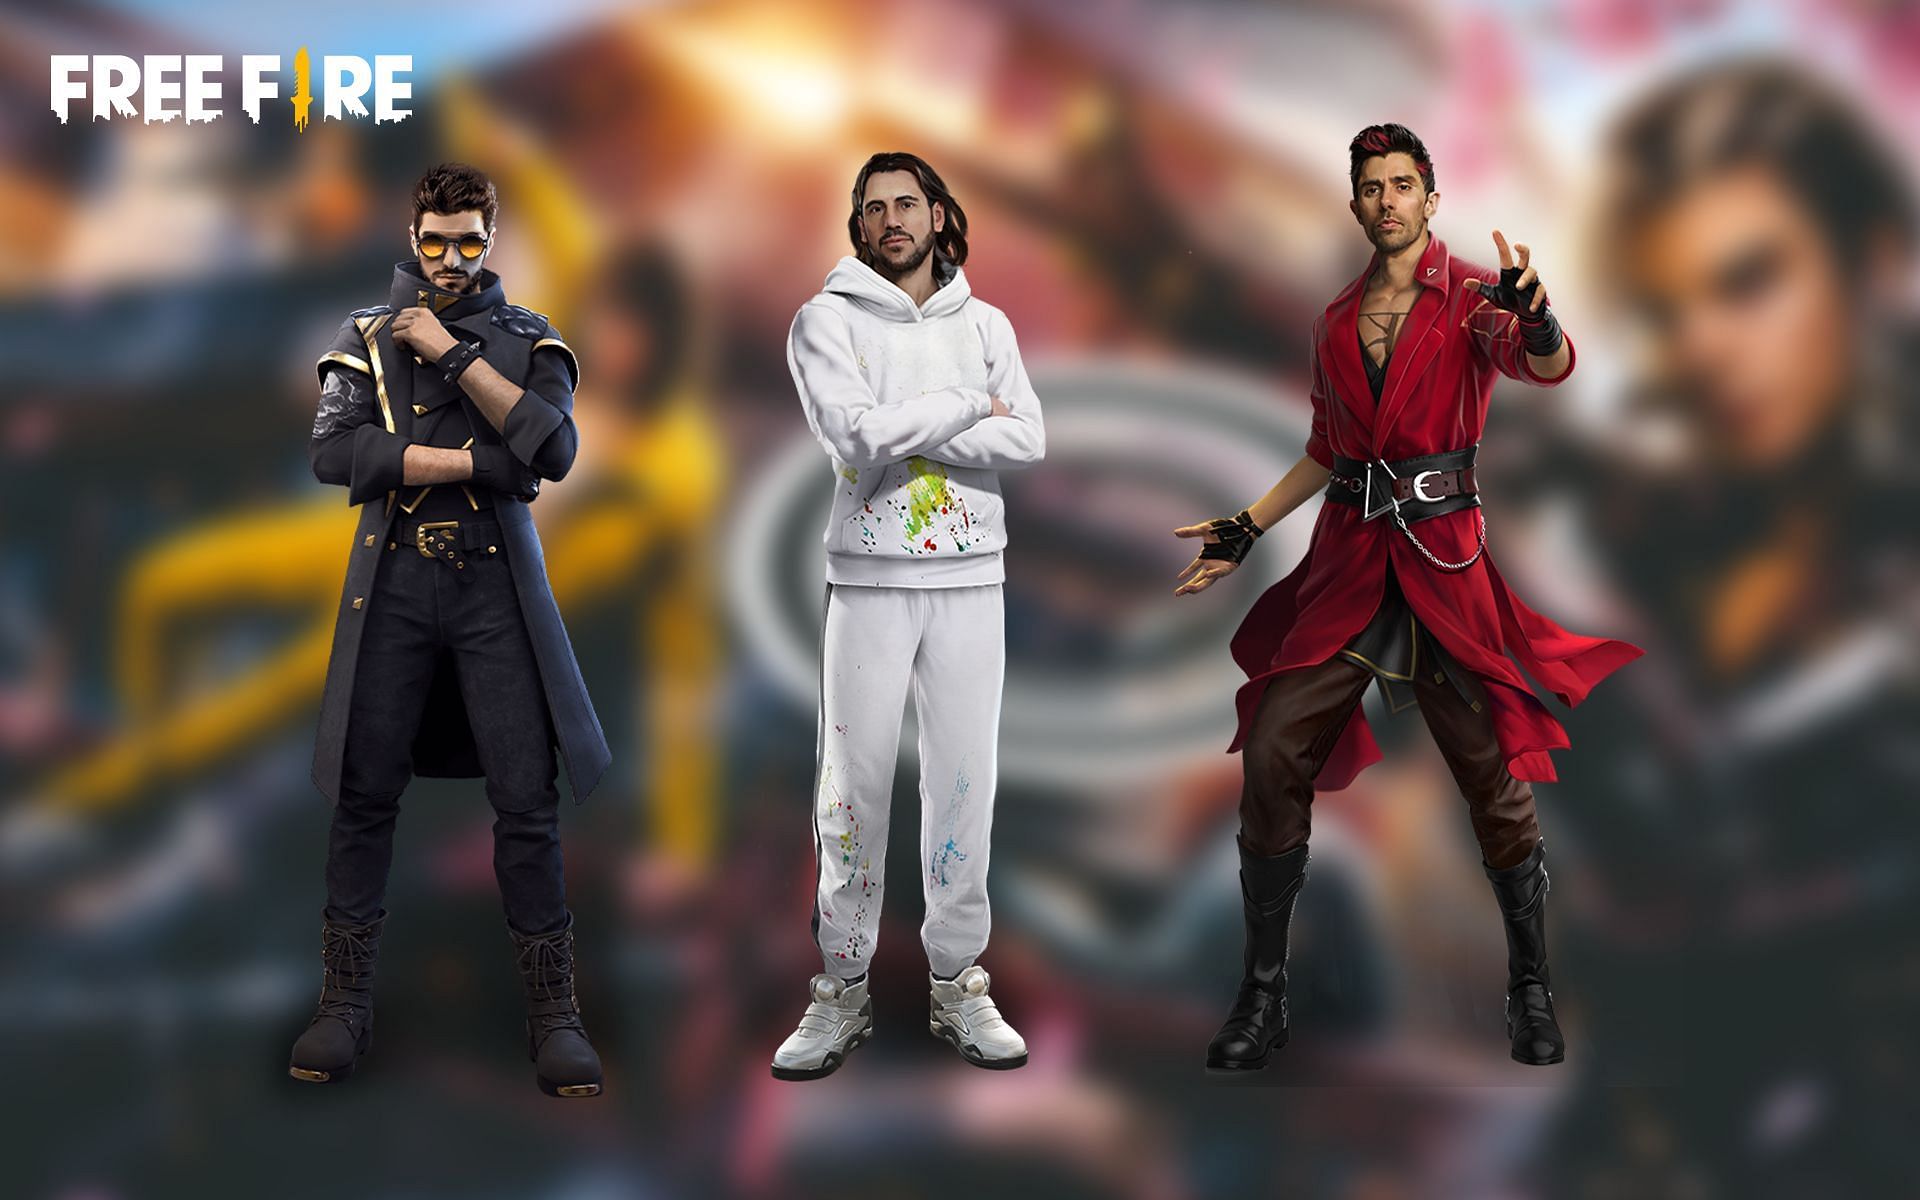 Characters with active ability in Free Fire (Image via Sportskeeda)